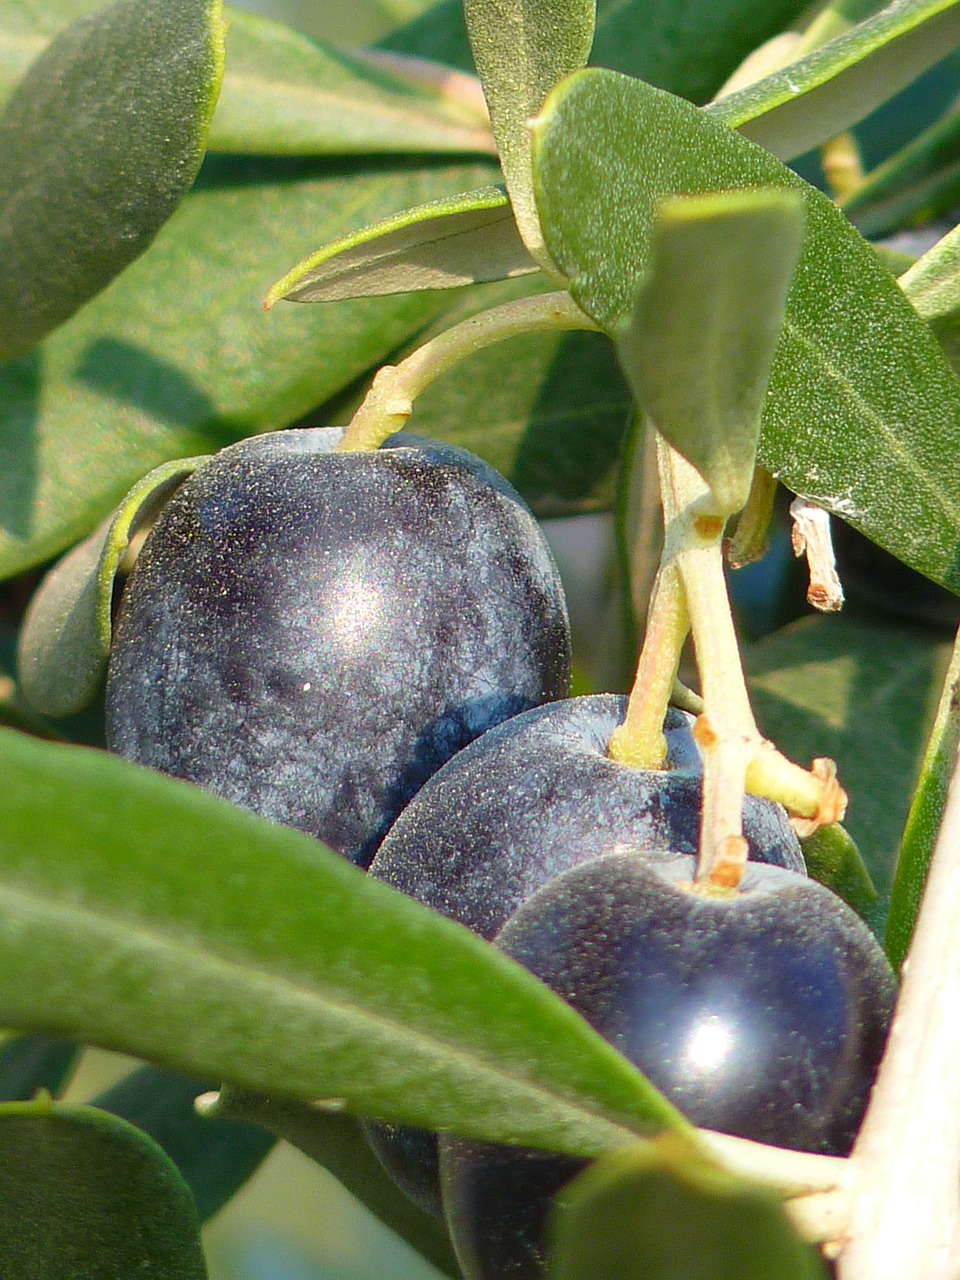 olives,fruit,olive tree,oelfrucht,olive branch,nature,plant,free pictures, free photos, free images, royalty free, free illustrations, public domain